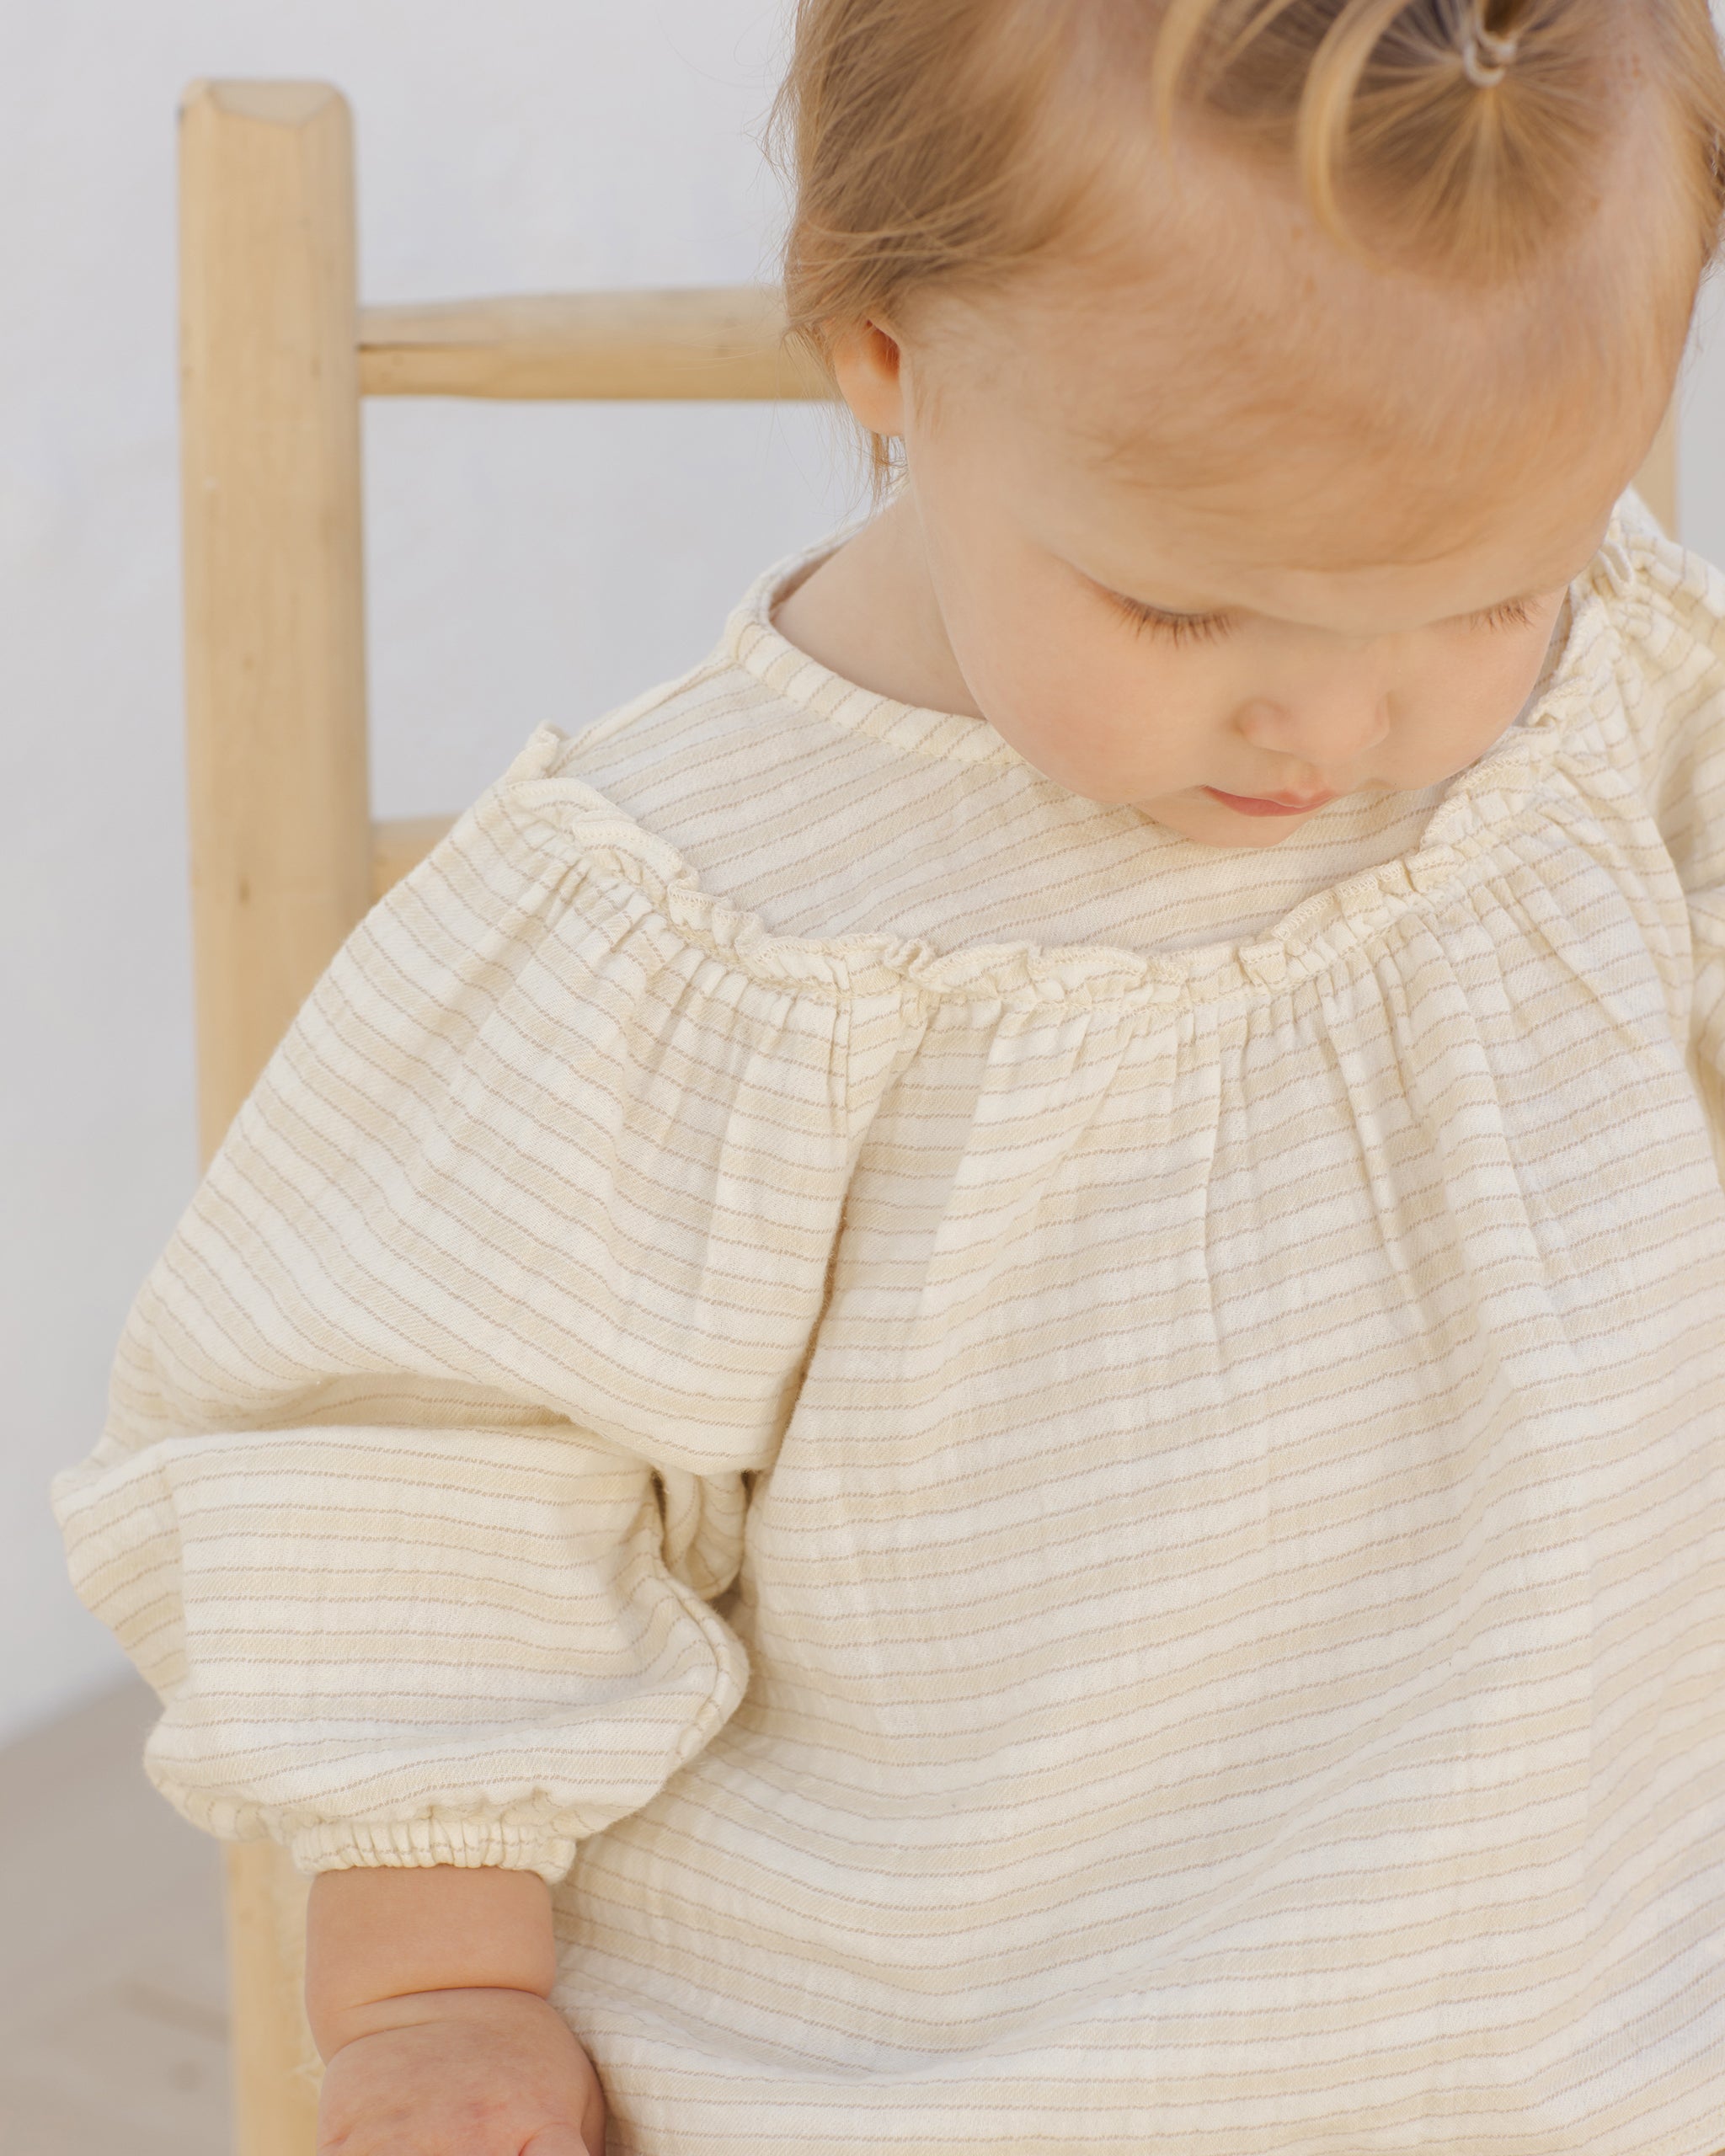 Mia Top + Bloomer Set || Lemon Stripe - Rylee + Cru | Kids Clothes | Trendy Baby Clothes | Modern Infant Outfits |